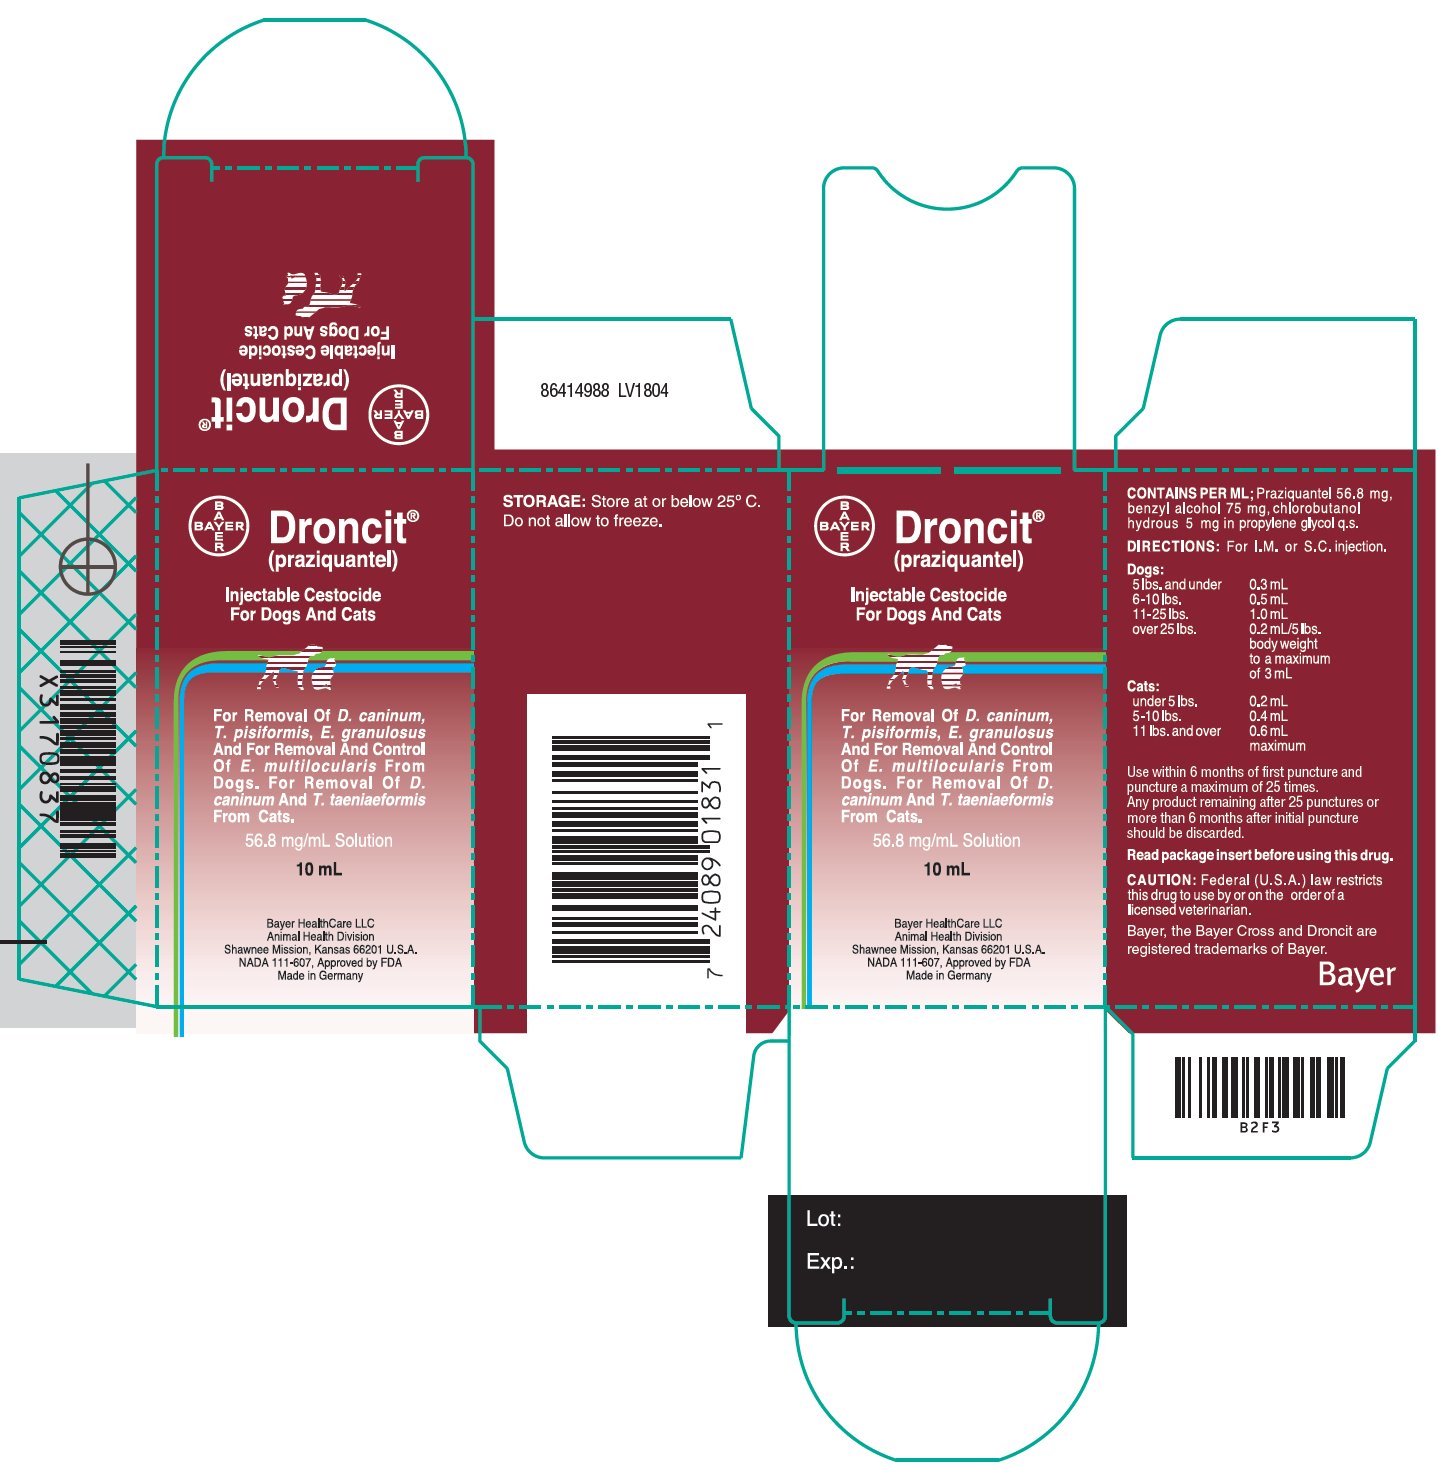 Droncit (praziquantel) Injectable Cestocide For Dogs and Cats 56.8 mg/mL Solution carton label